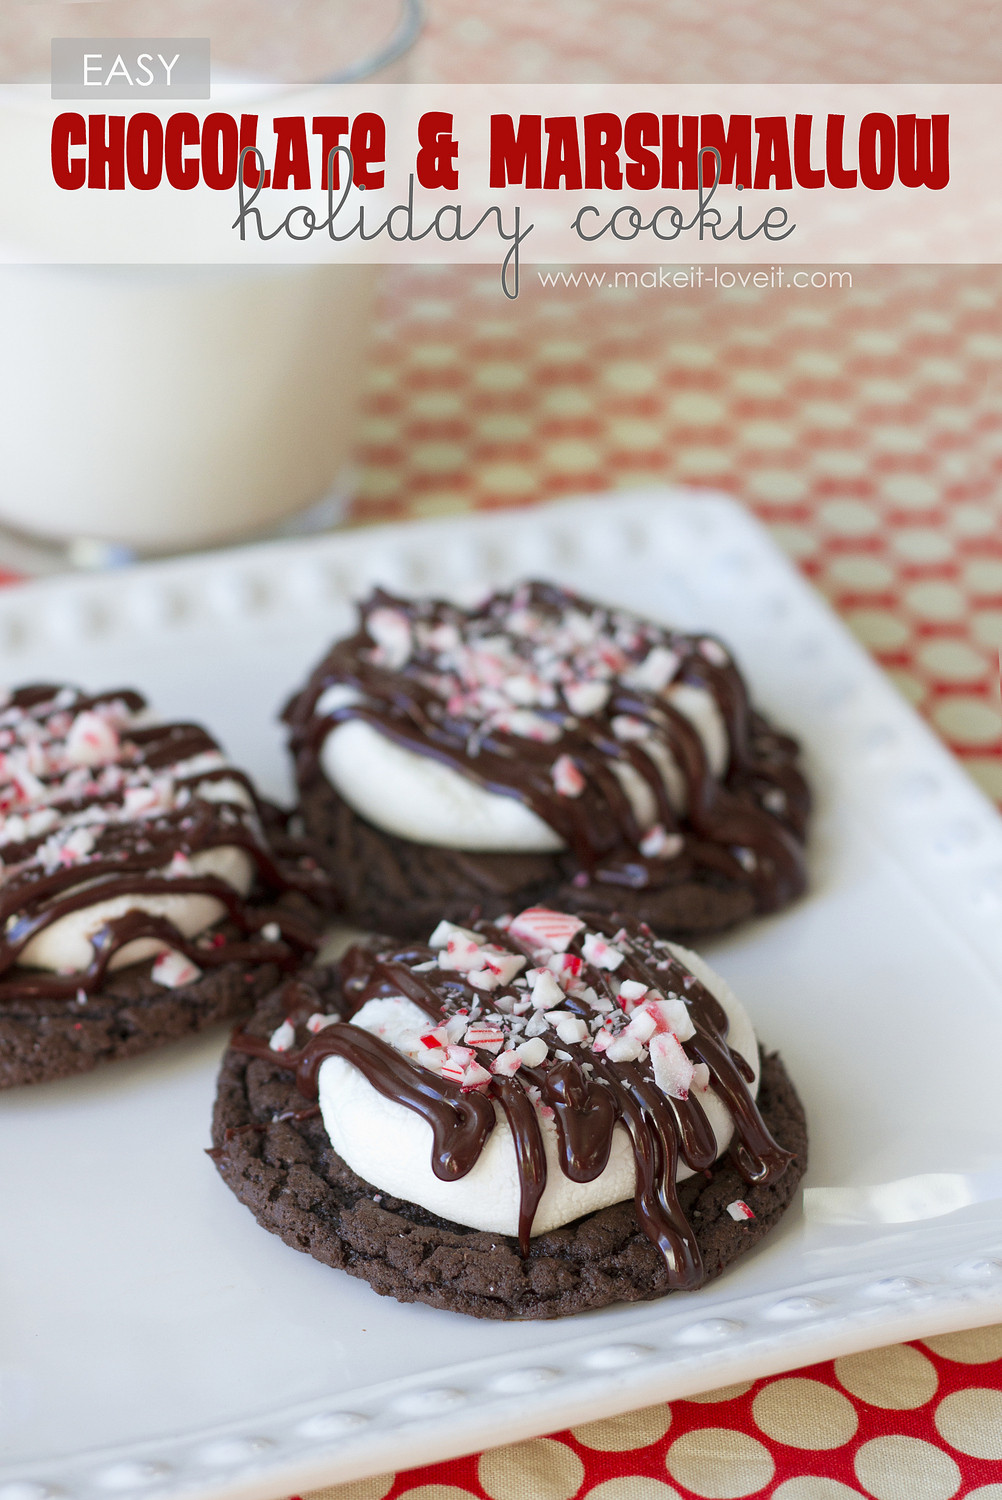 Quick Easy Christmas Cookies
 EASY Chocolate & Marshmallow Holiday Cookie plus a